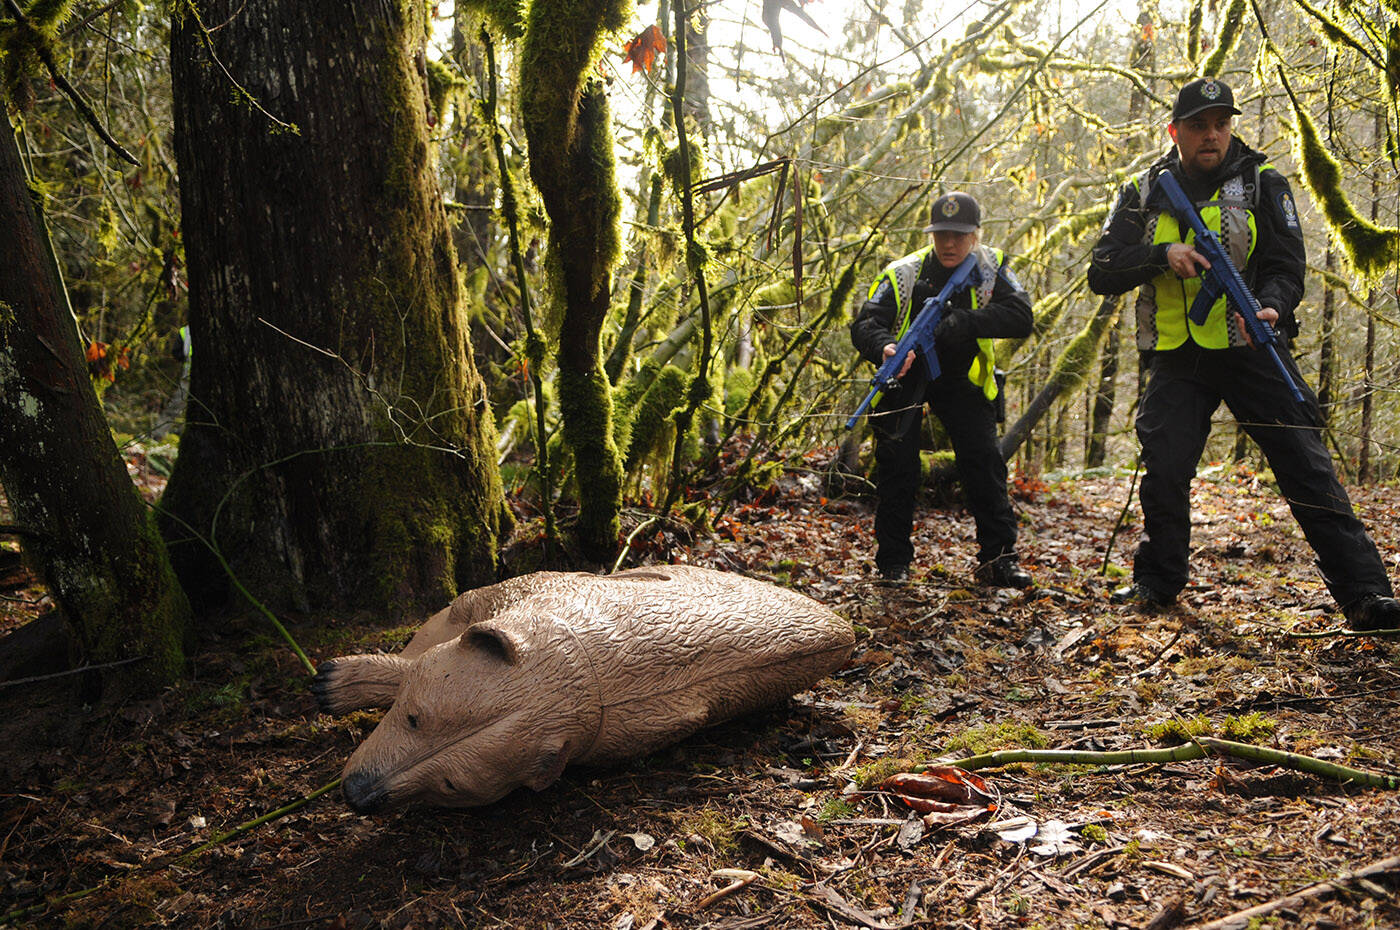 Decoys like this juvenile grizzly bear are used in the wildlife attack training scenarios for the conservation officers. (Jenna Hauck/ Chilliwack Progress)